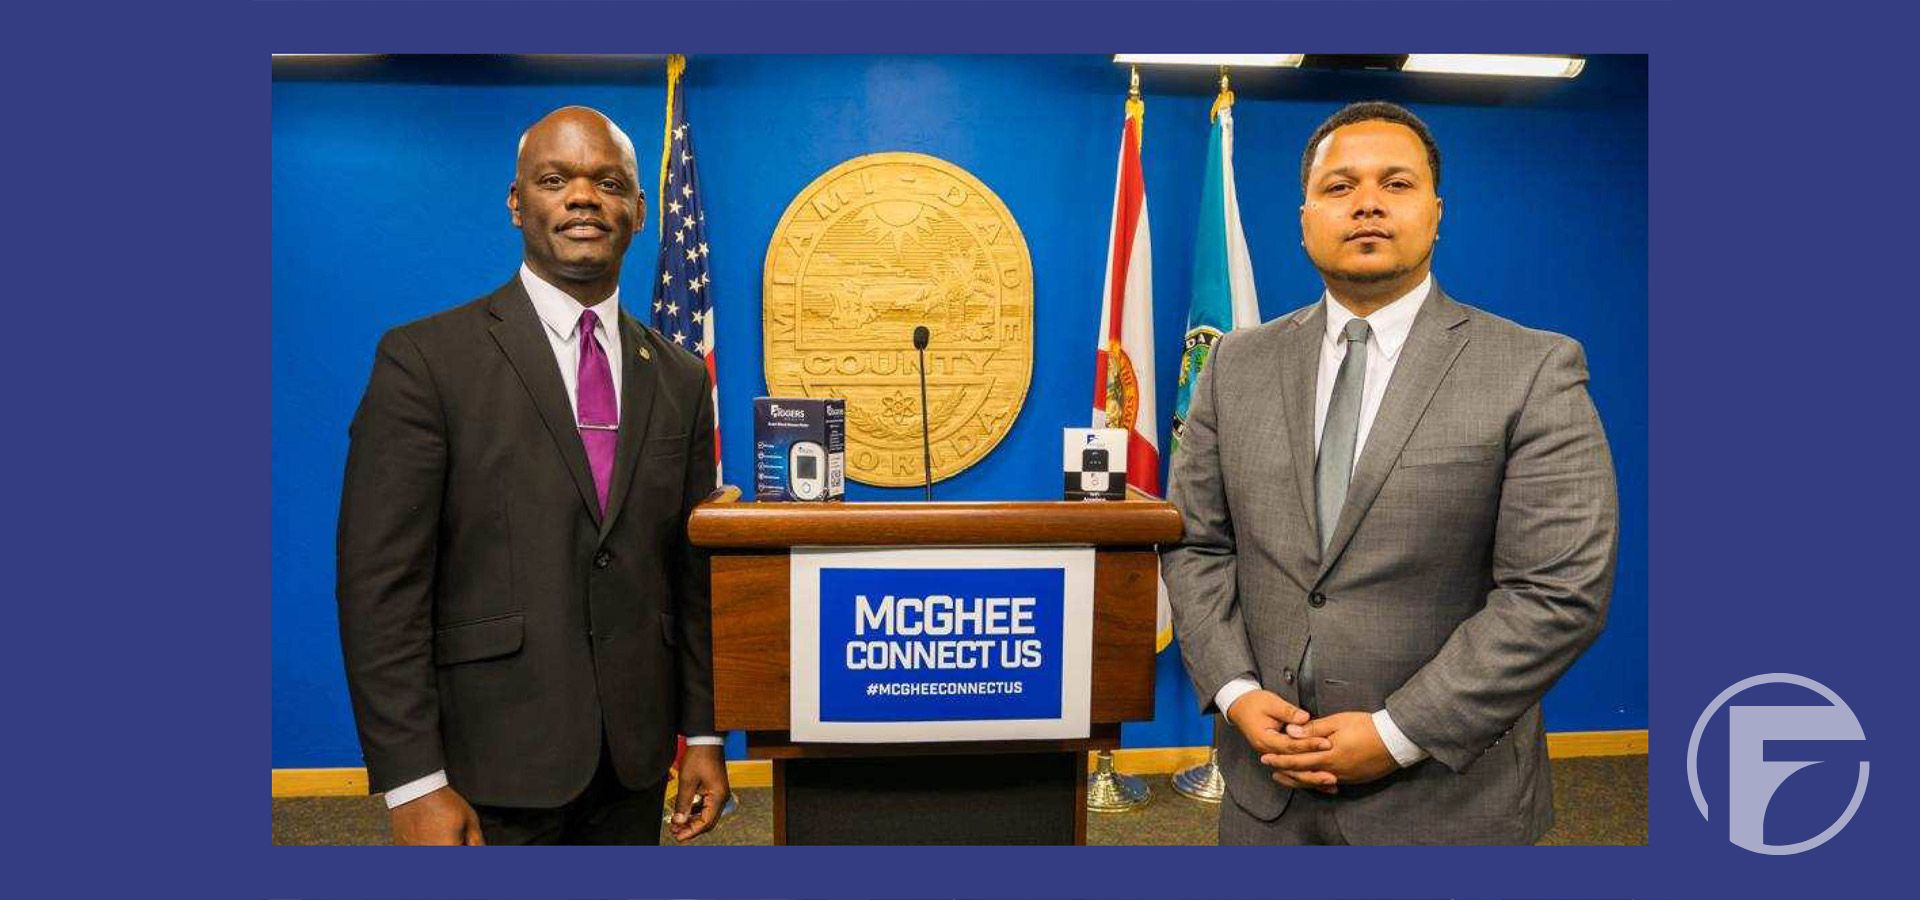 The Figgers Foundation is proud to have partnered with Commissioner Kionne L. McGhee in announcing the creation of the McGhee Connect Program.